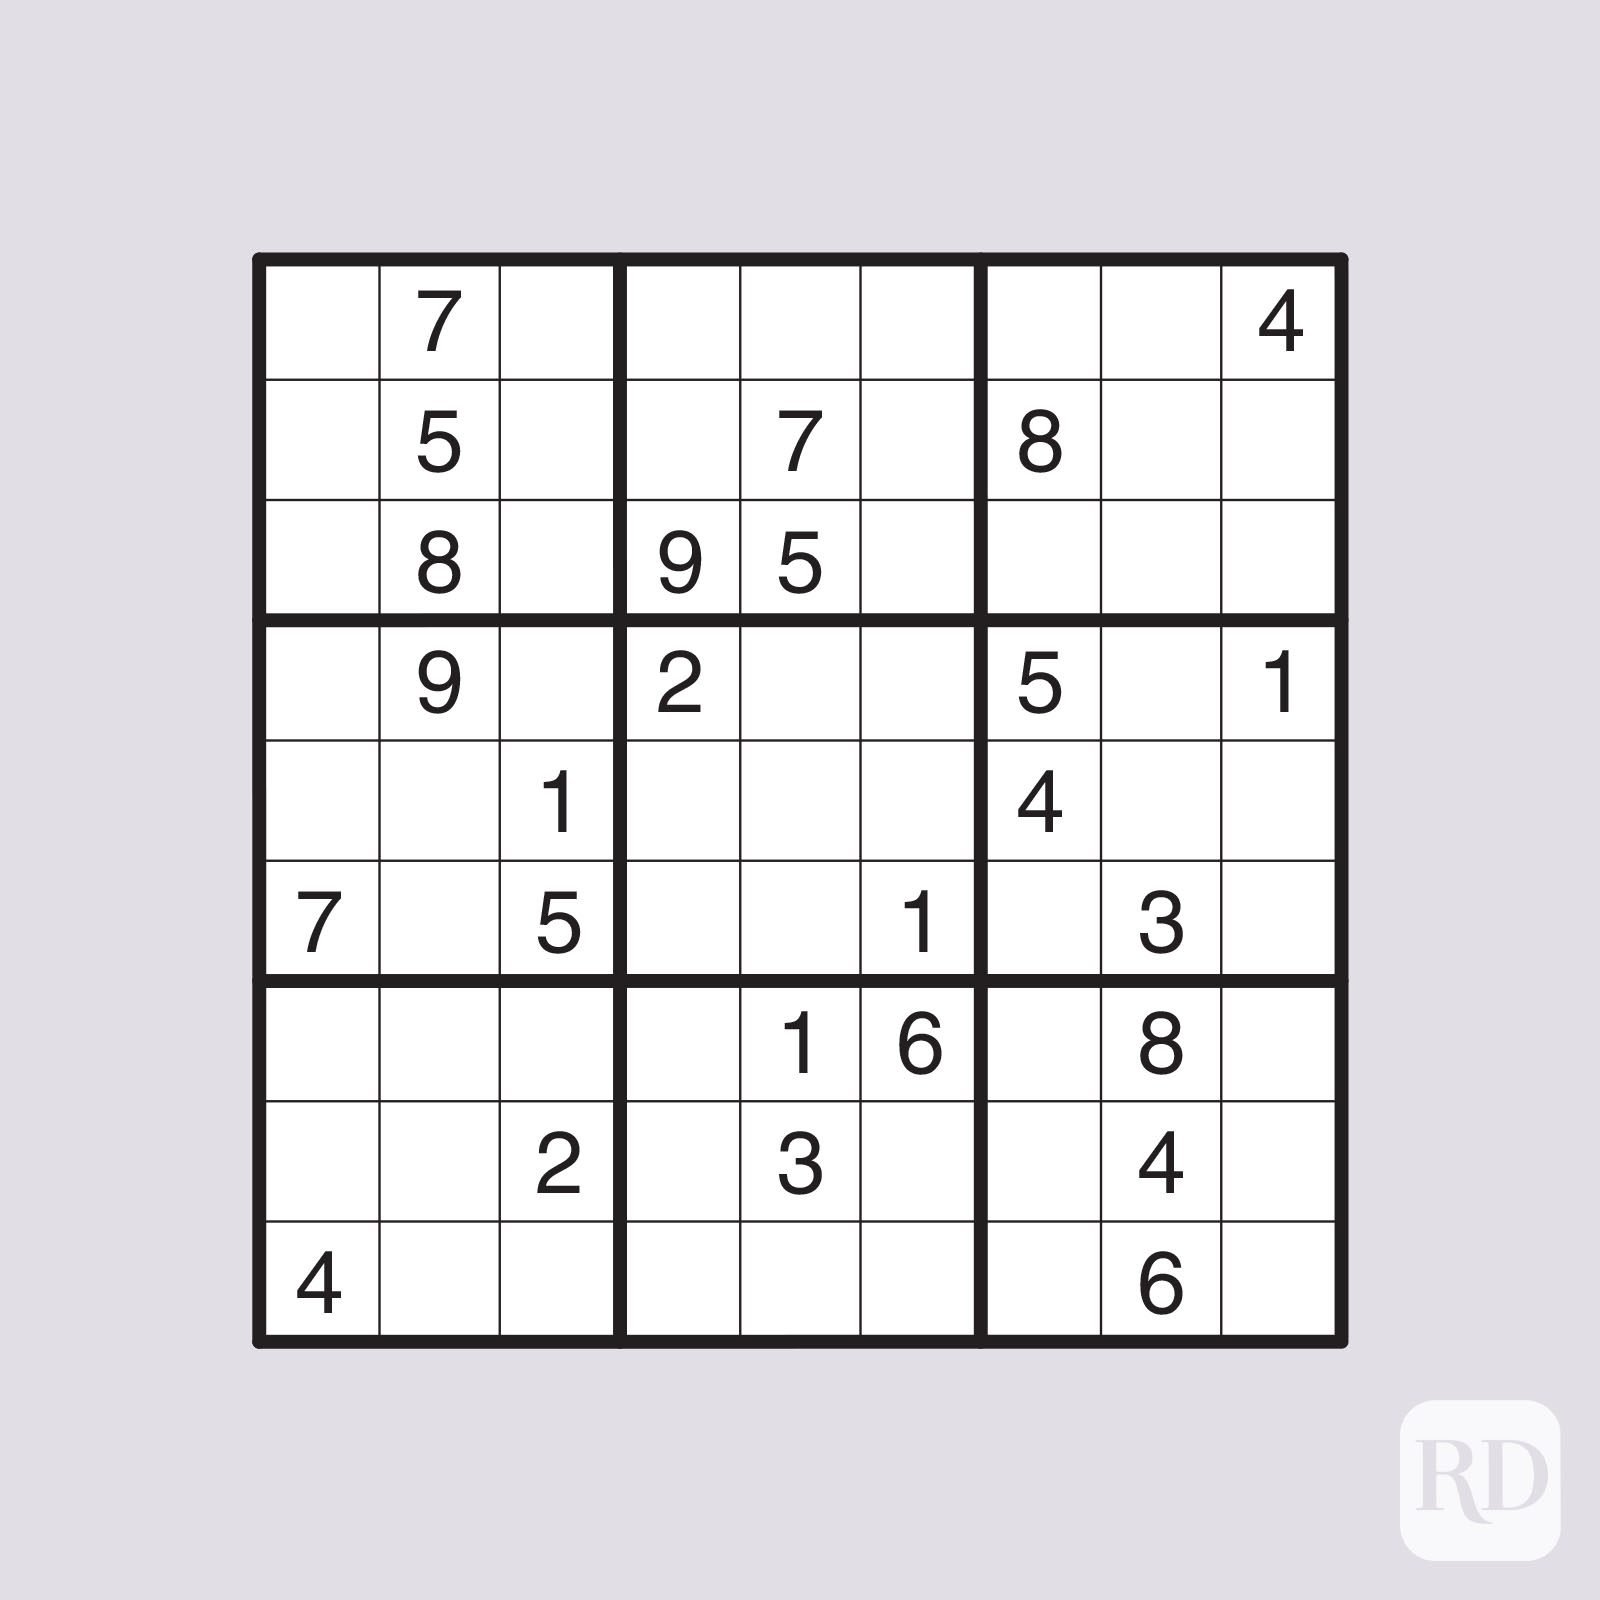 20 Free Printable Sudoku Puzzles for All Levels